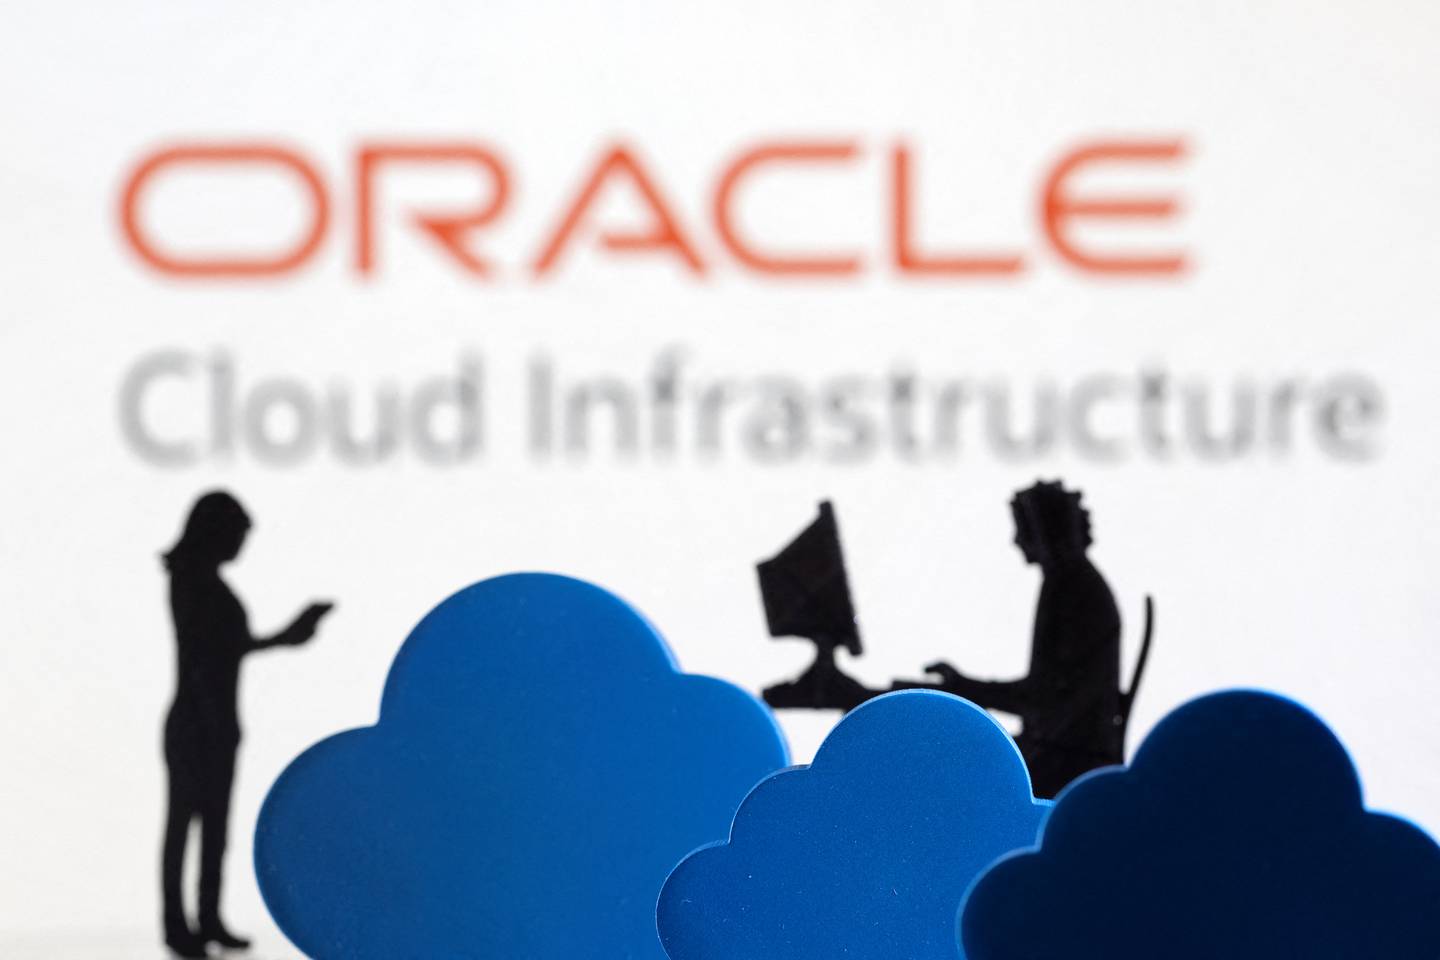 US technology company Oracle announced a series of new cloud-focused products at Oracle Cloud World on Tuesday. Reuters